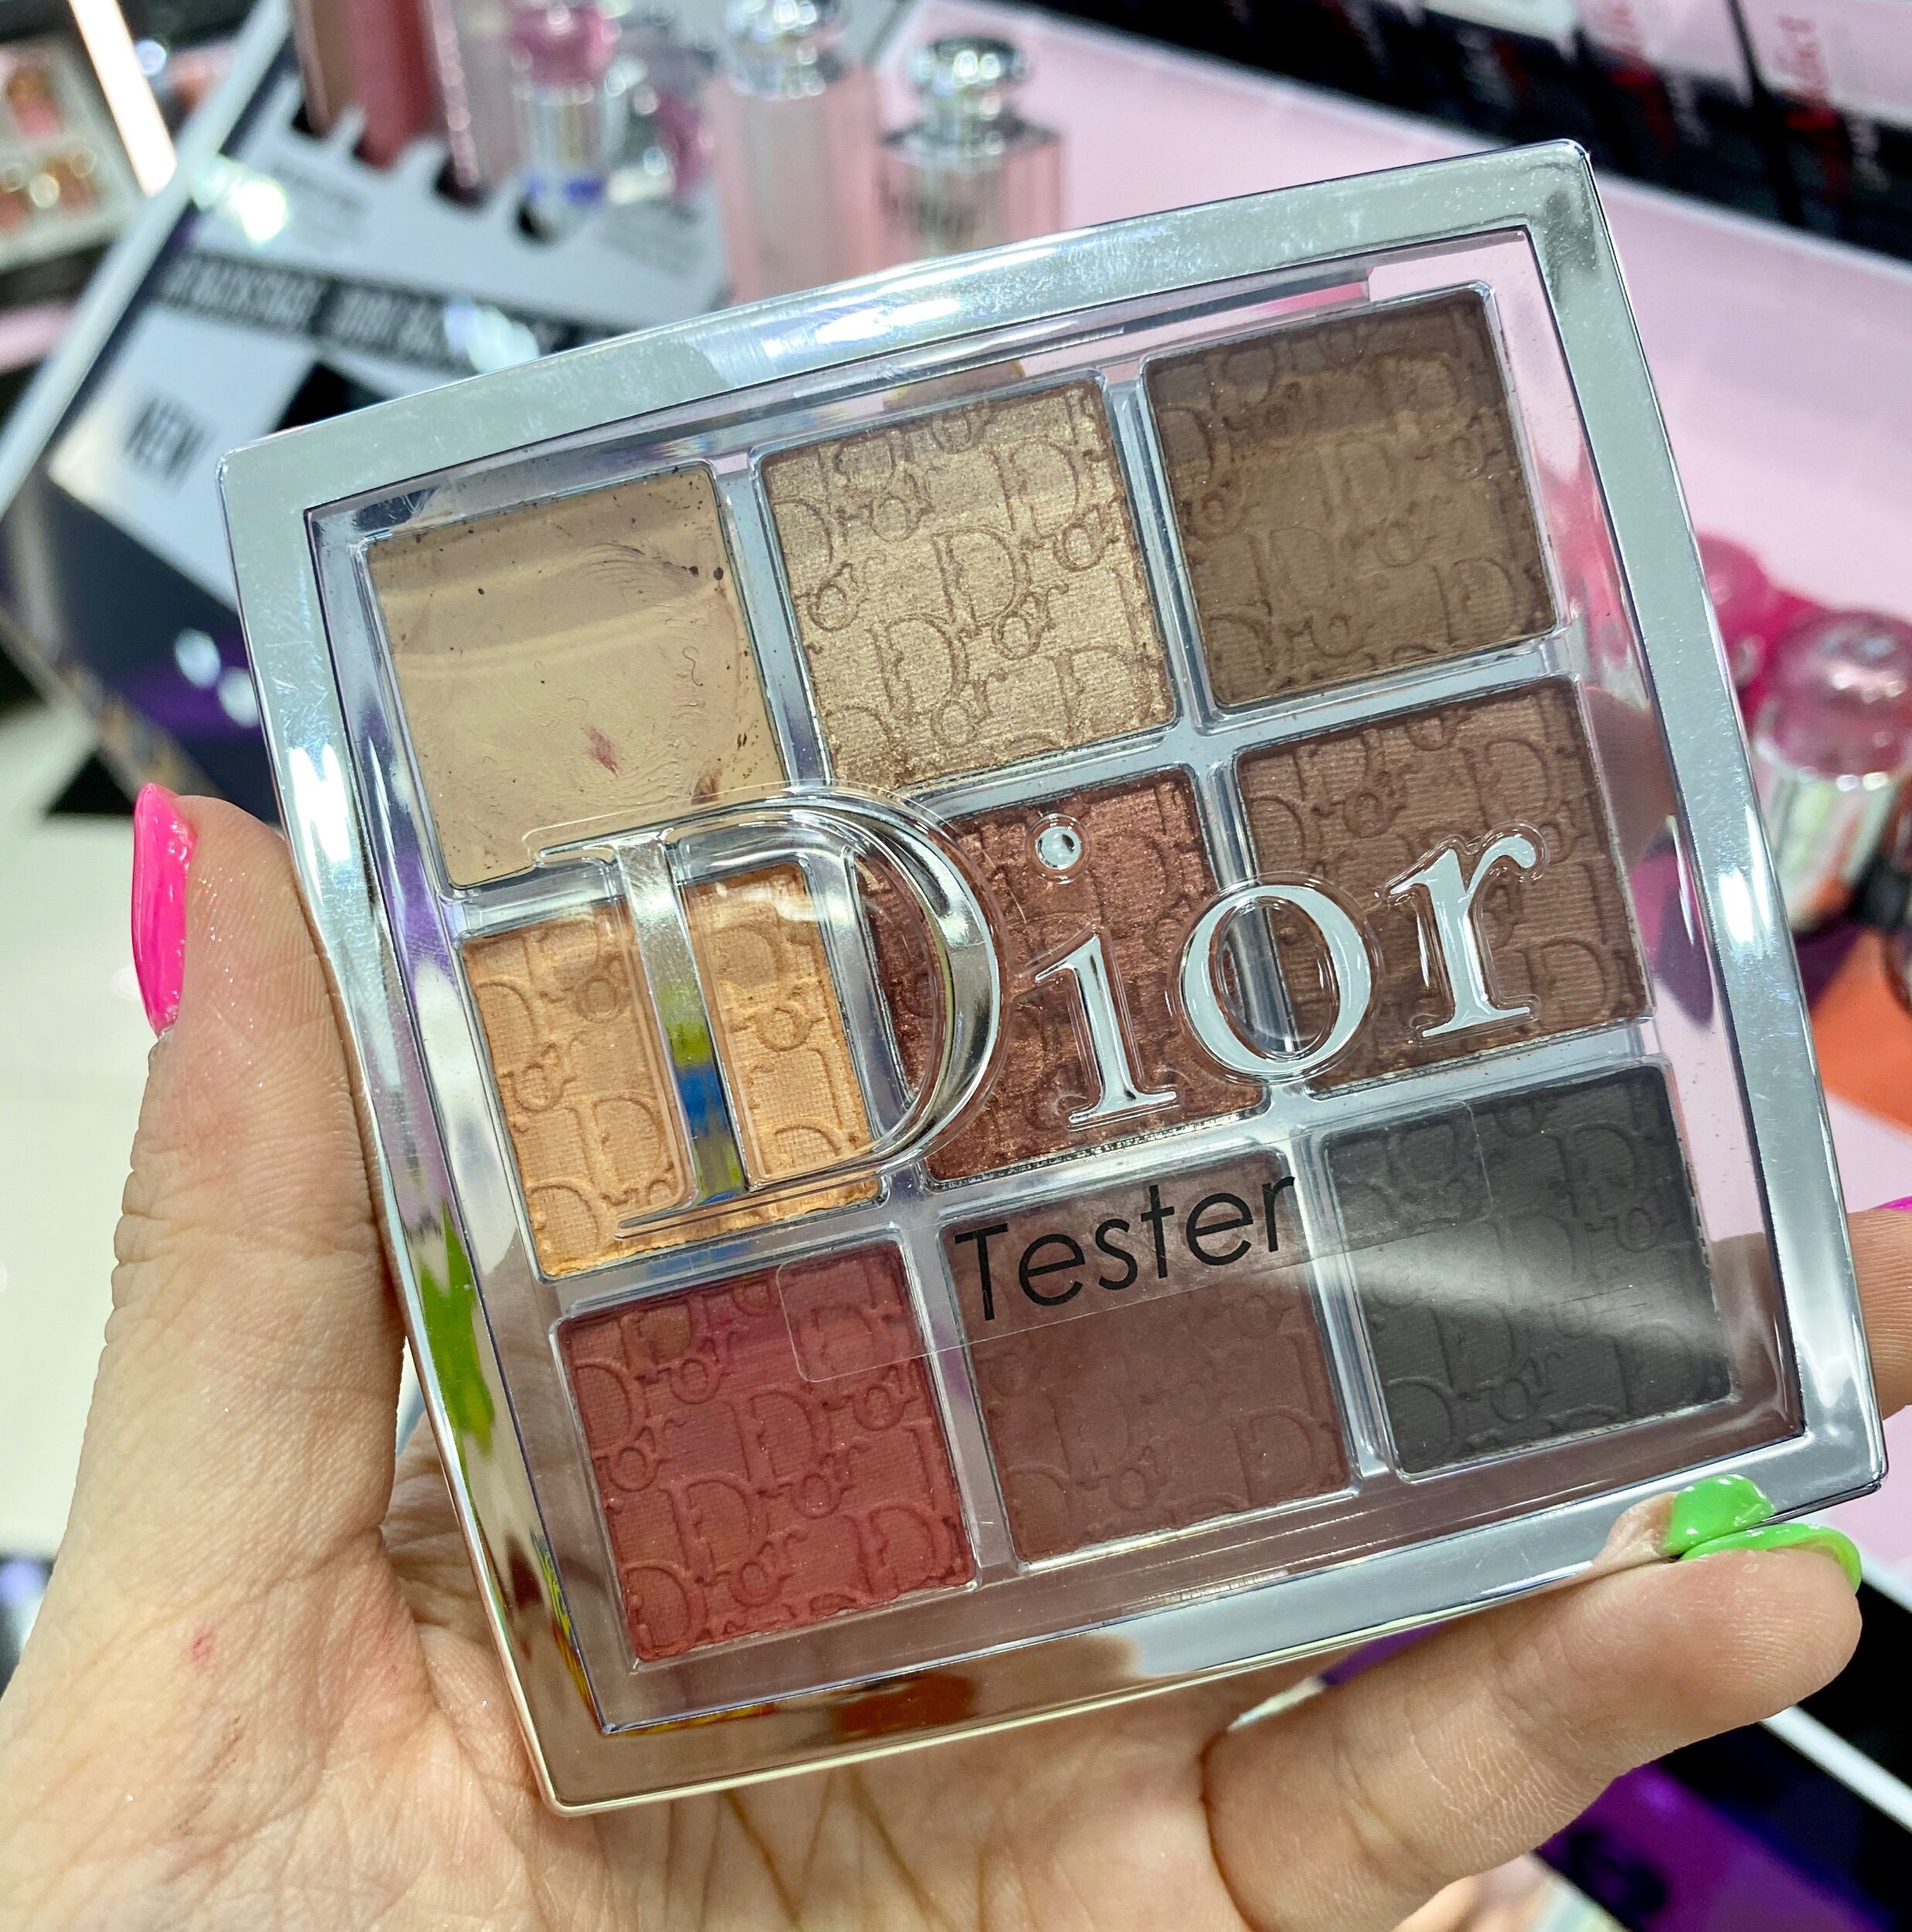 dior backstage eyeshadow review